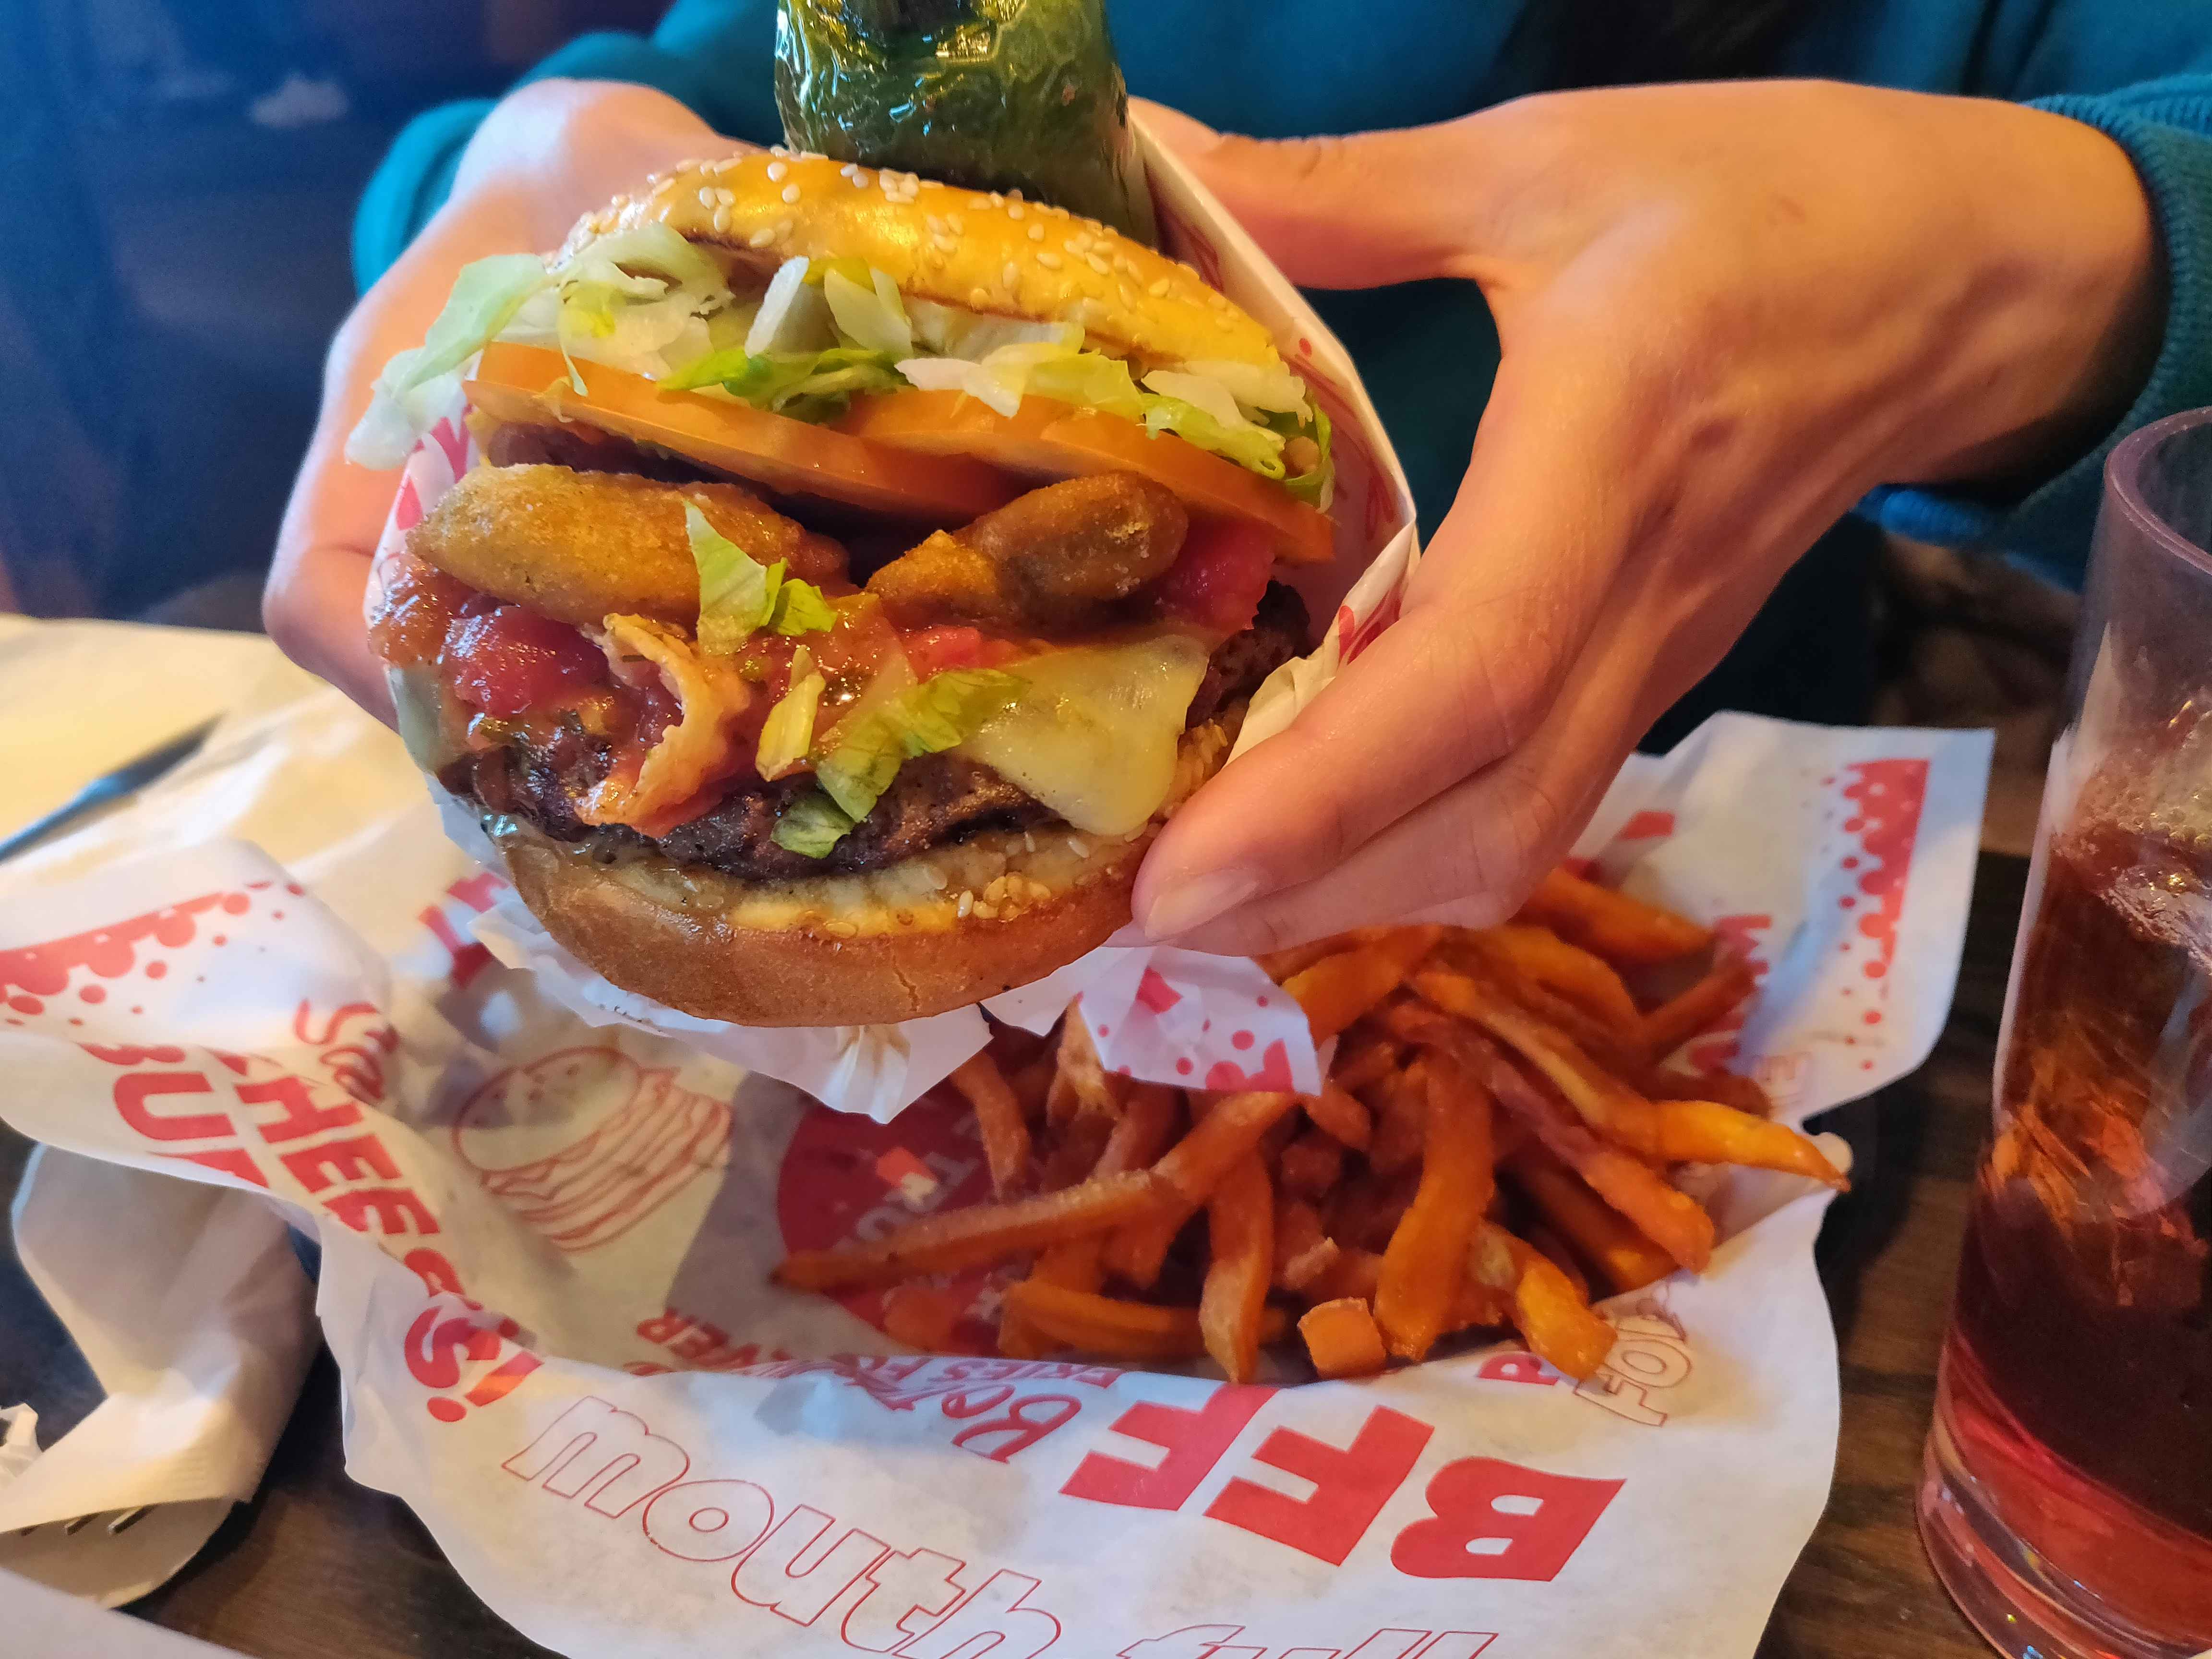 A person's hands lifting a large jalapeño burger out of a basket with fries at Red Robin.